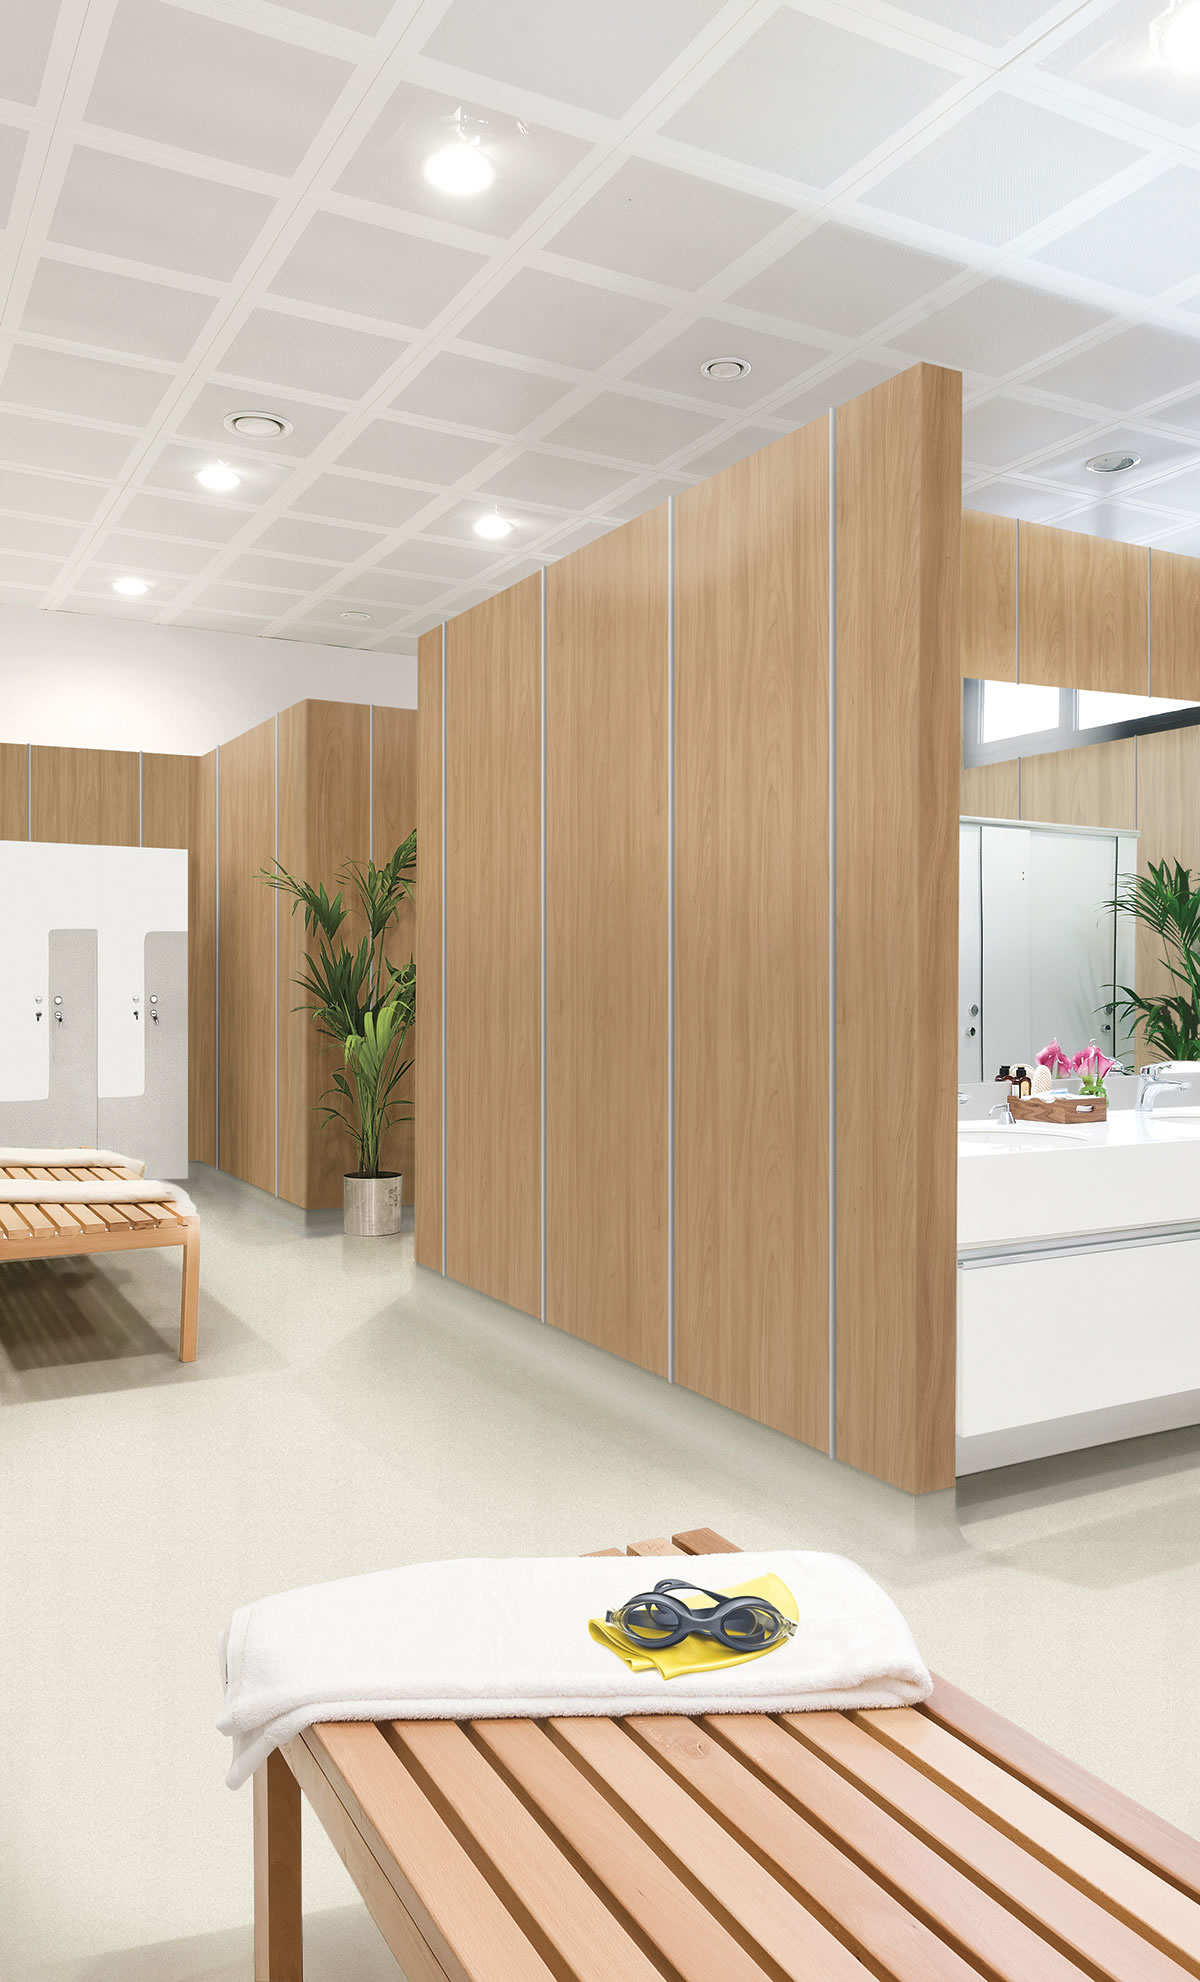 Altro Whiterock Hygienic Wall Cladding: Colours and Designs